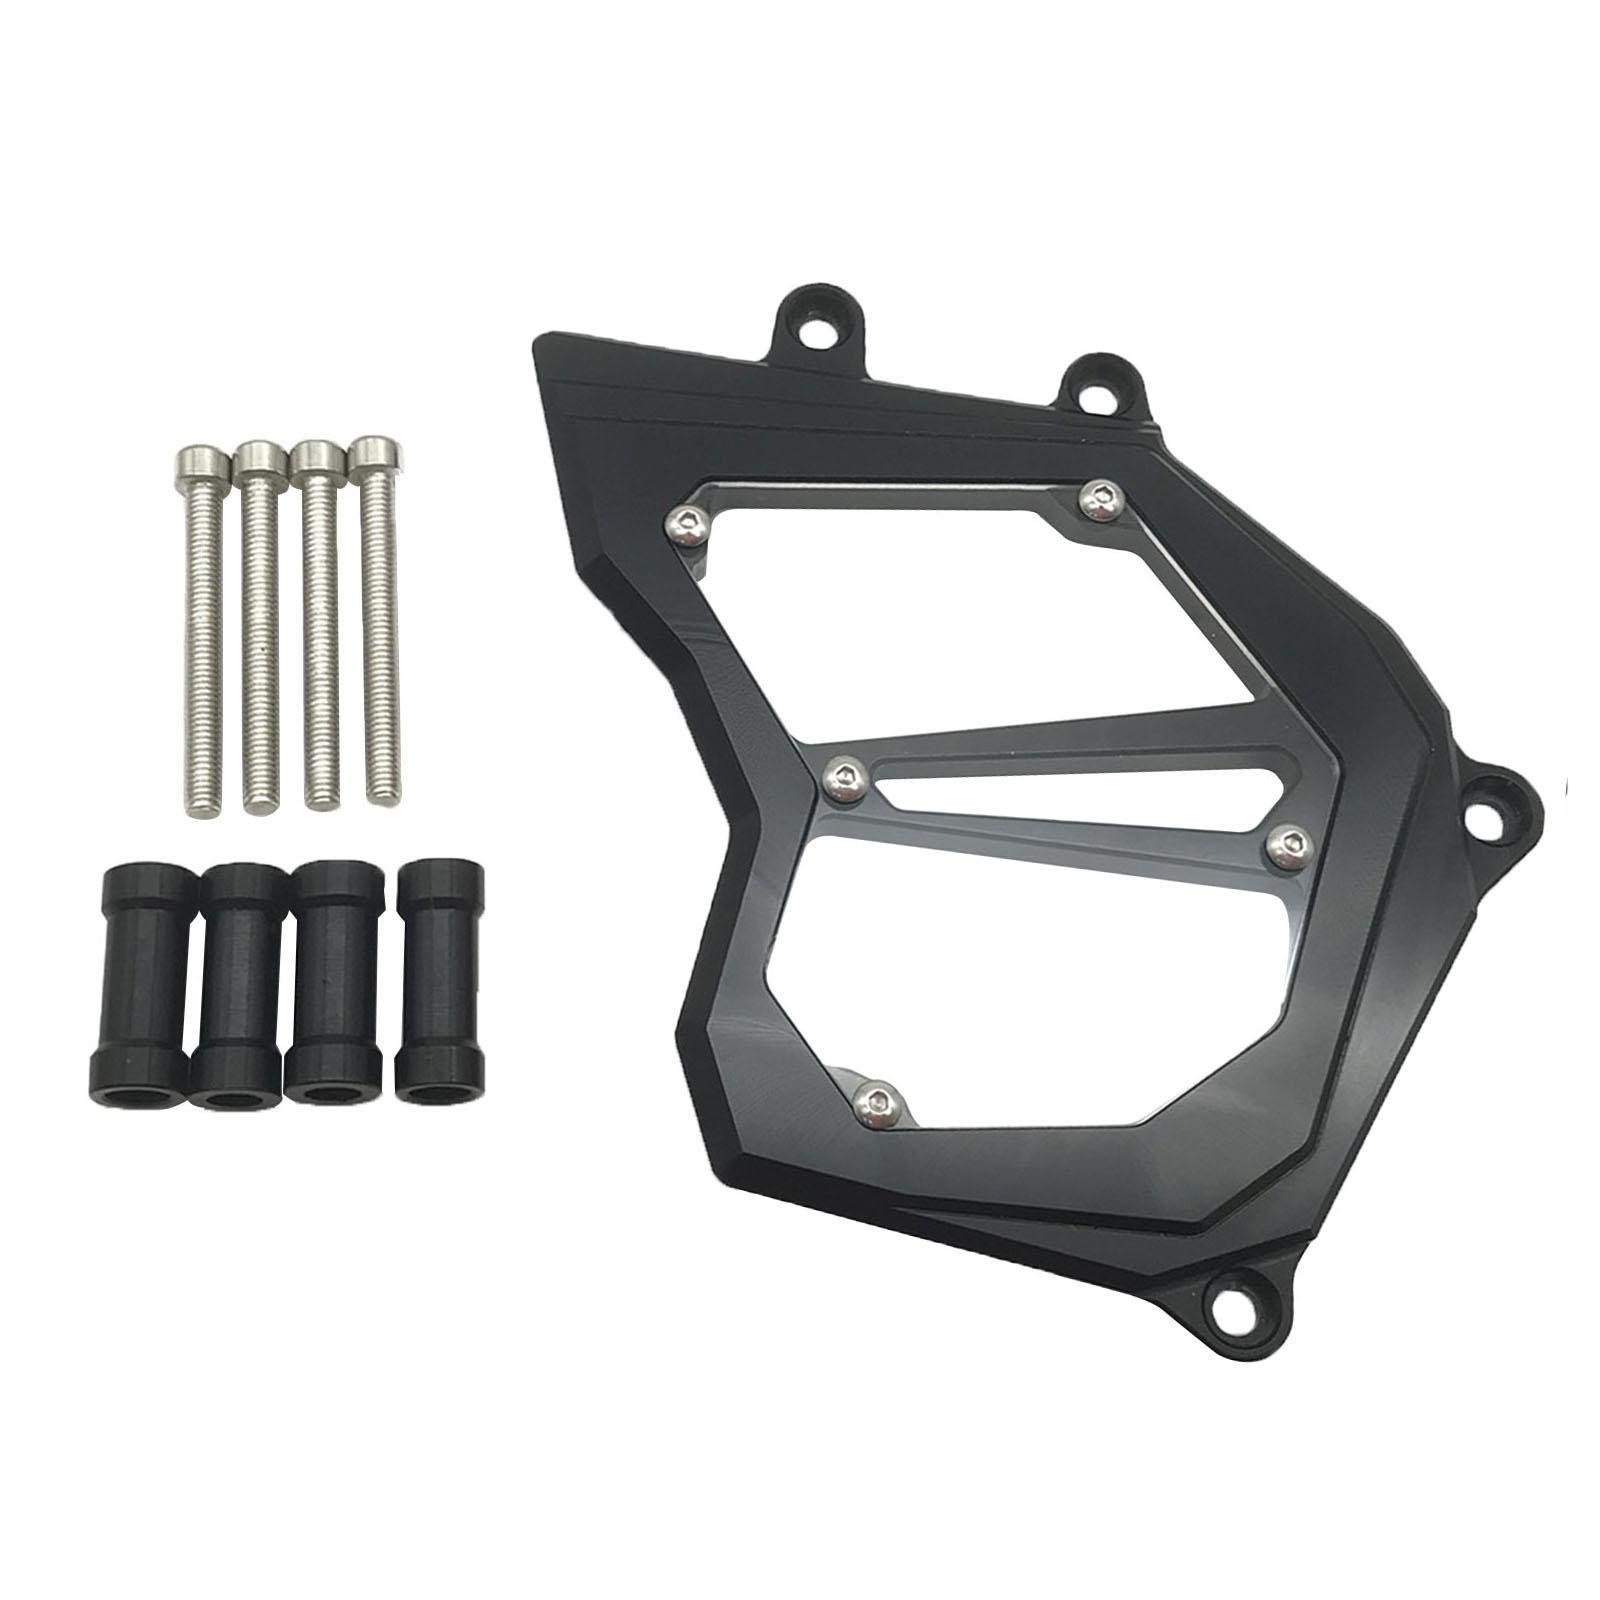 Front Sprocket Cover Chain Guard Kit for  ZX10R Durable